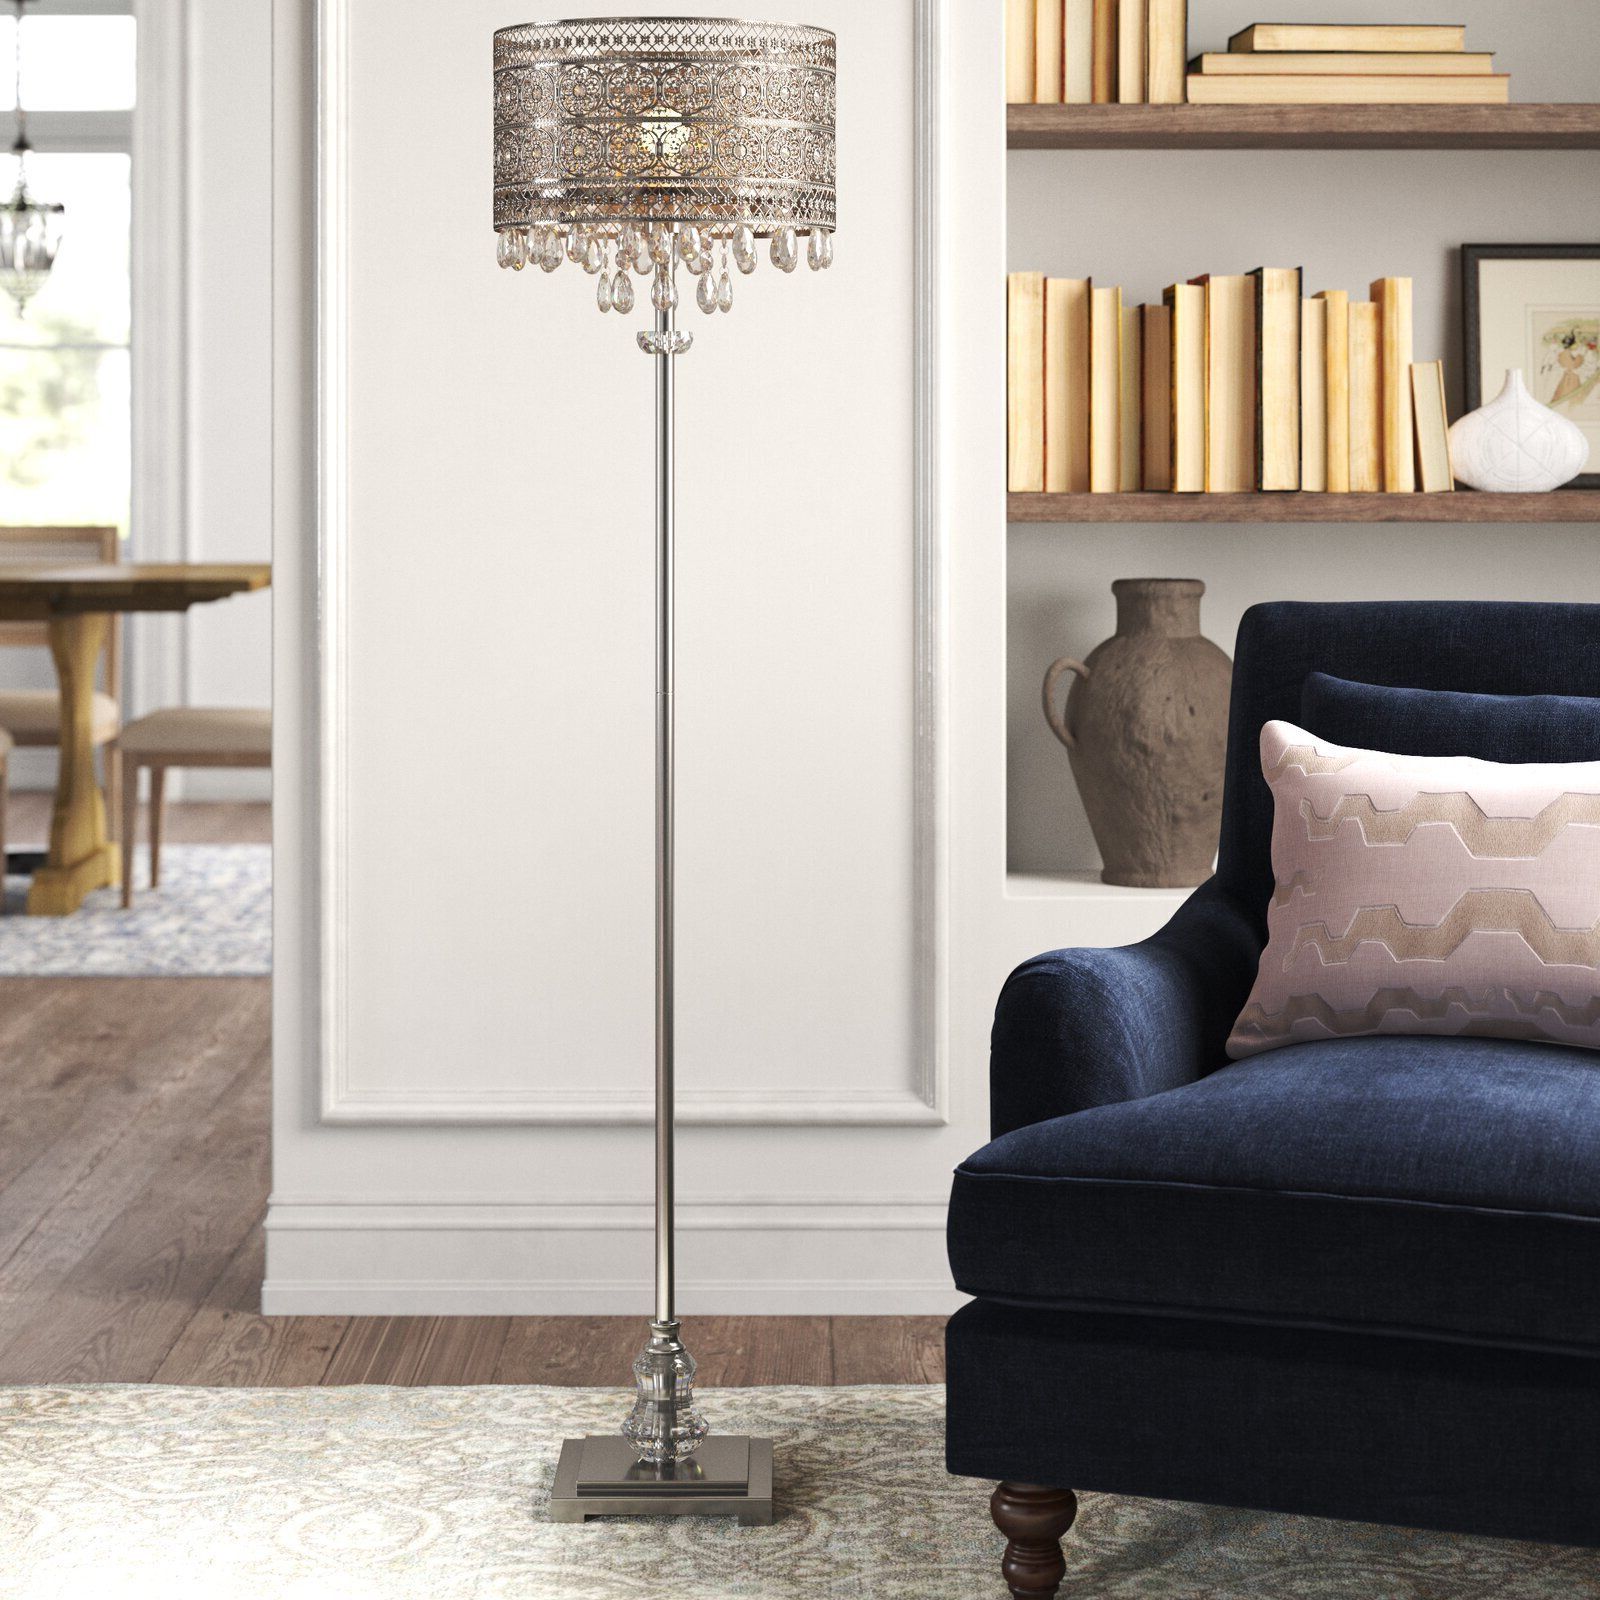 Chandelier Floor Lamps – Ideas On Foter Intended For Chandelier Style Floor Lamps (View 7 of 20)